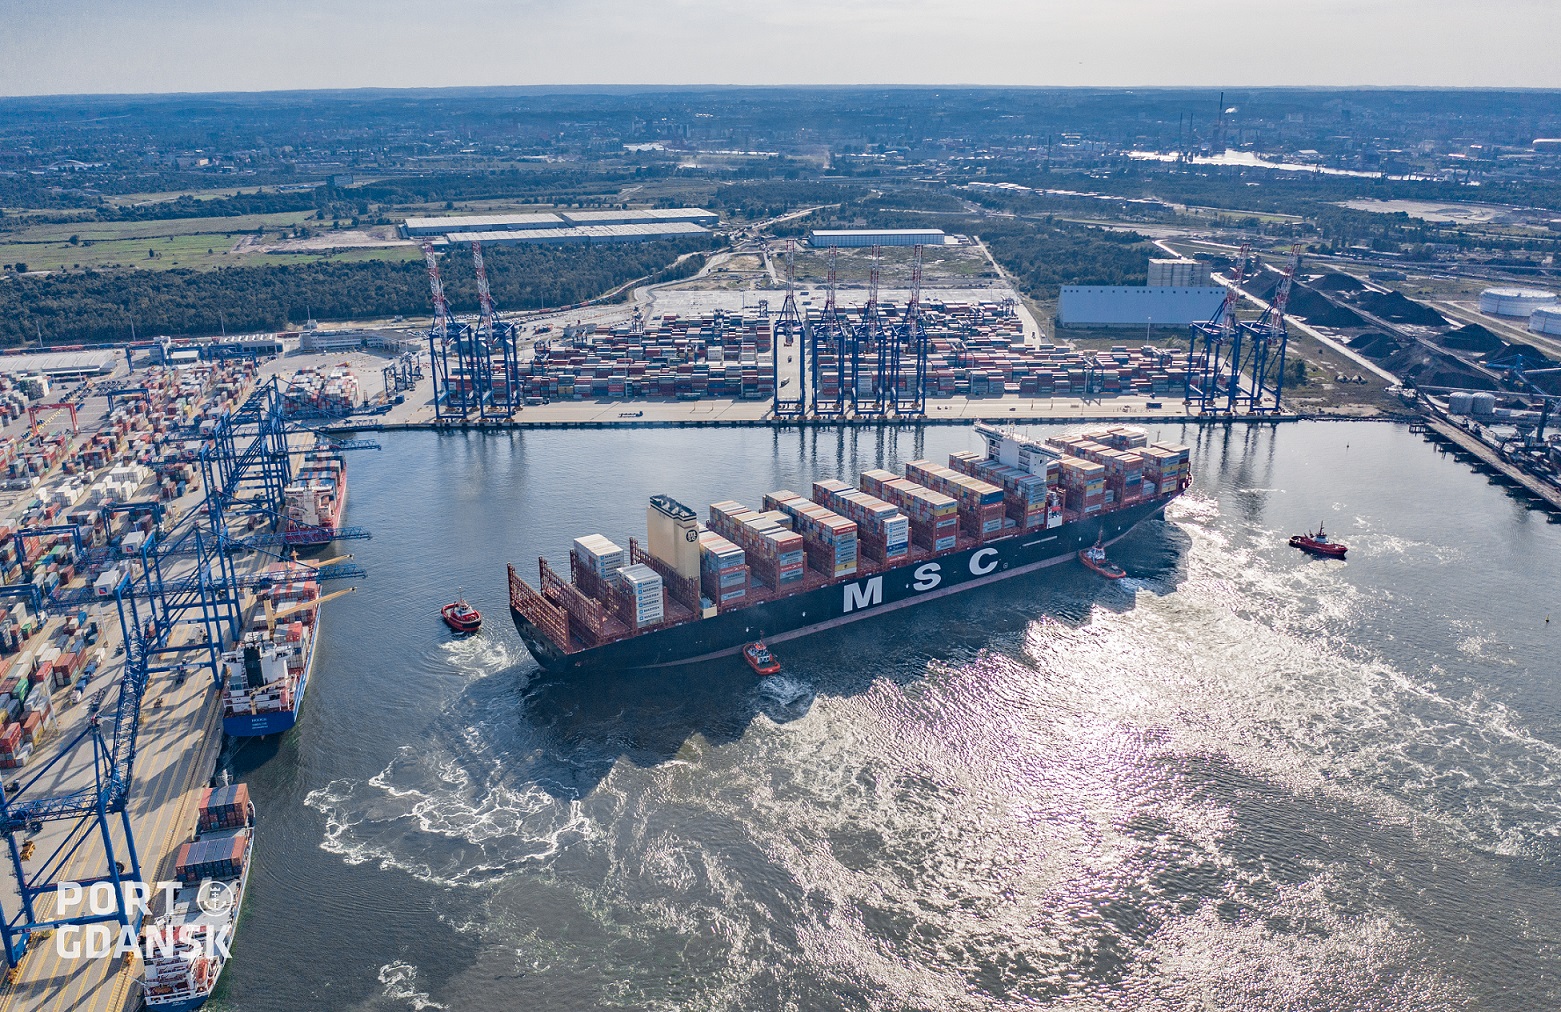 https://www.porttechnology.org/news/port-of-gdansk-becomes-third-busiest-baltic-sea-port-for-cargo-shipments/